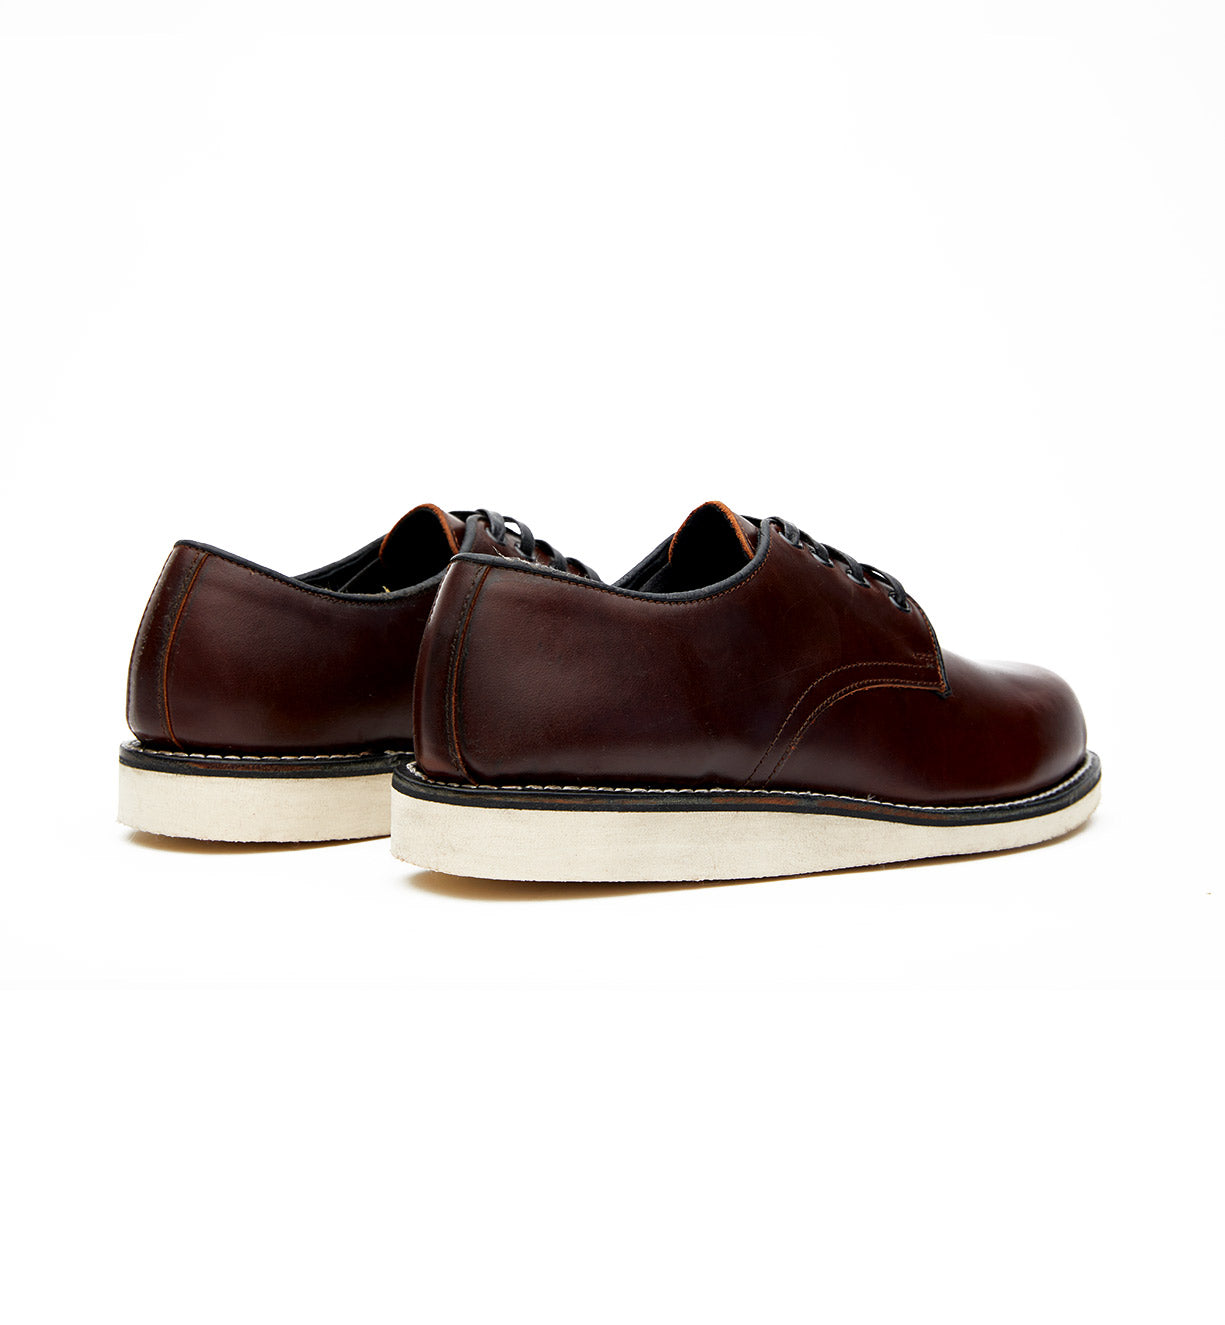 A pair of Michael II brown oxford shoes with full grain leather uppers on a white background by Broken Homme.